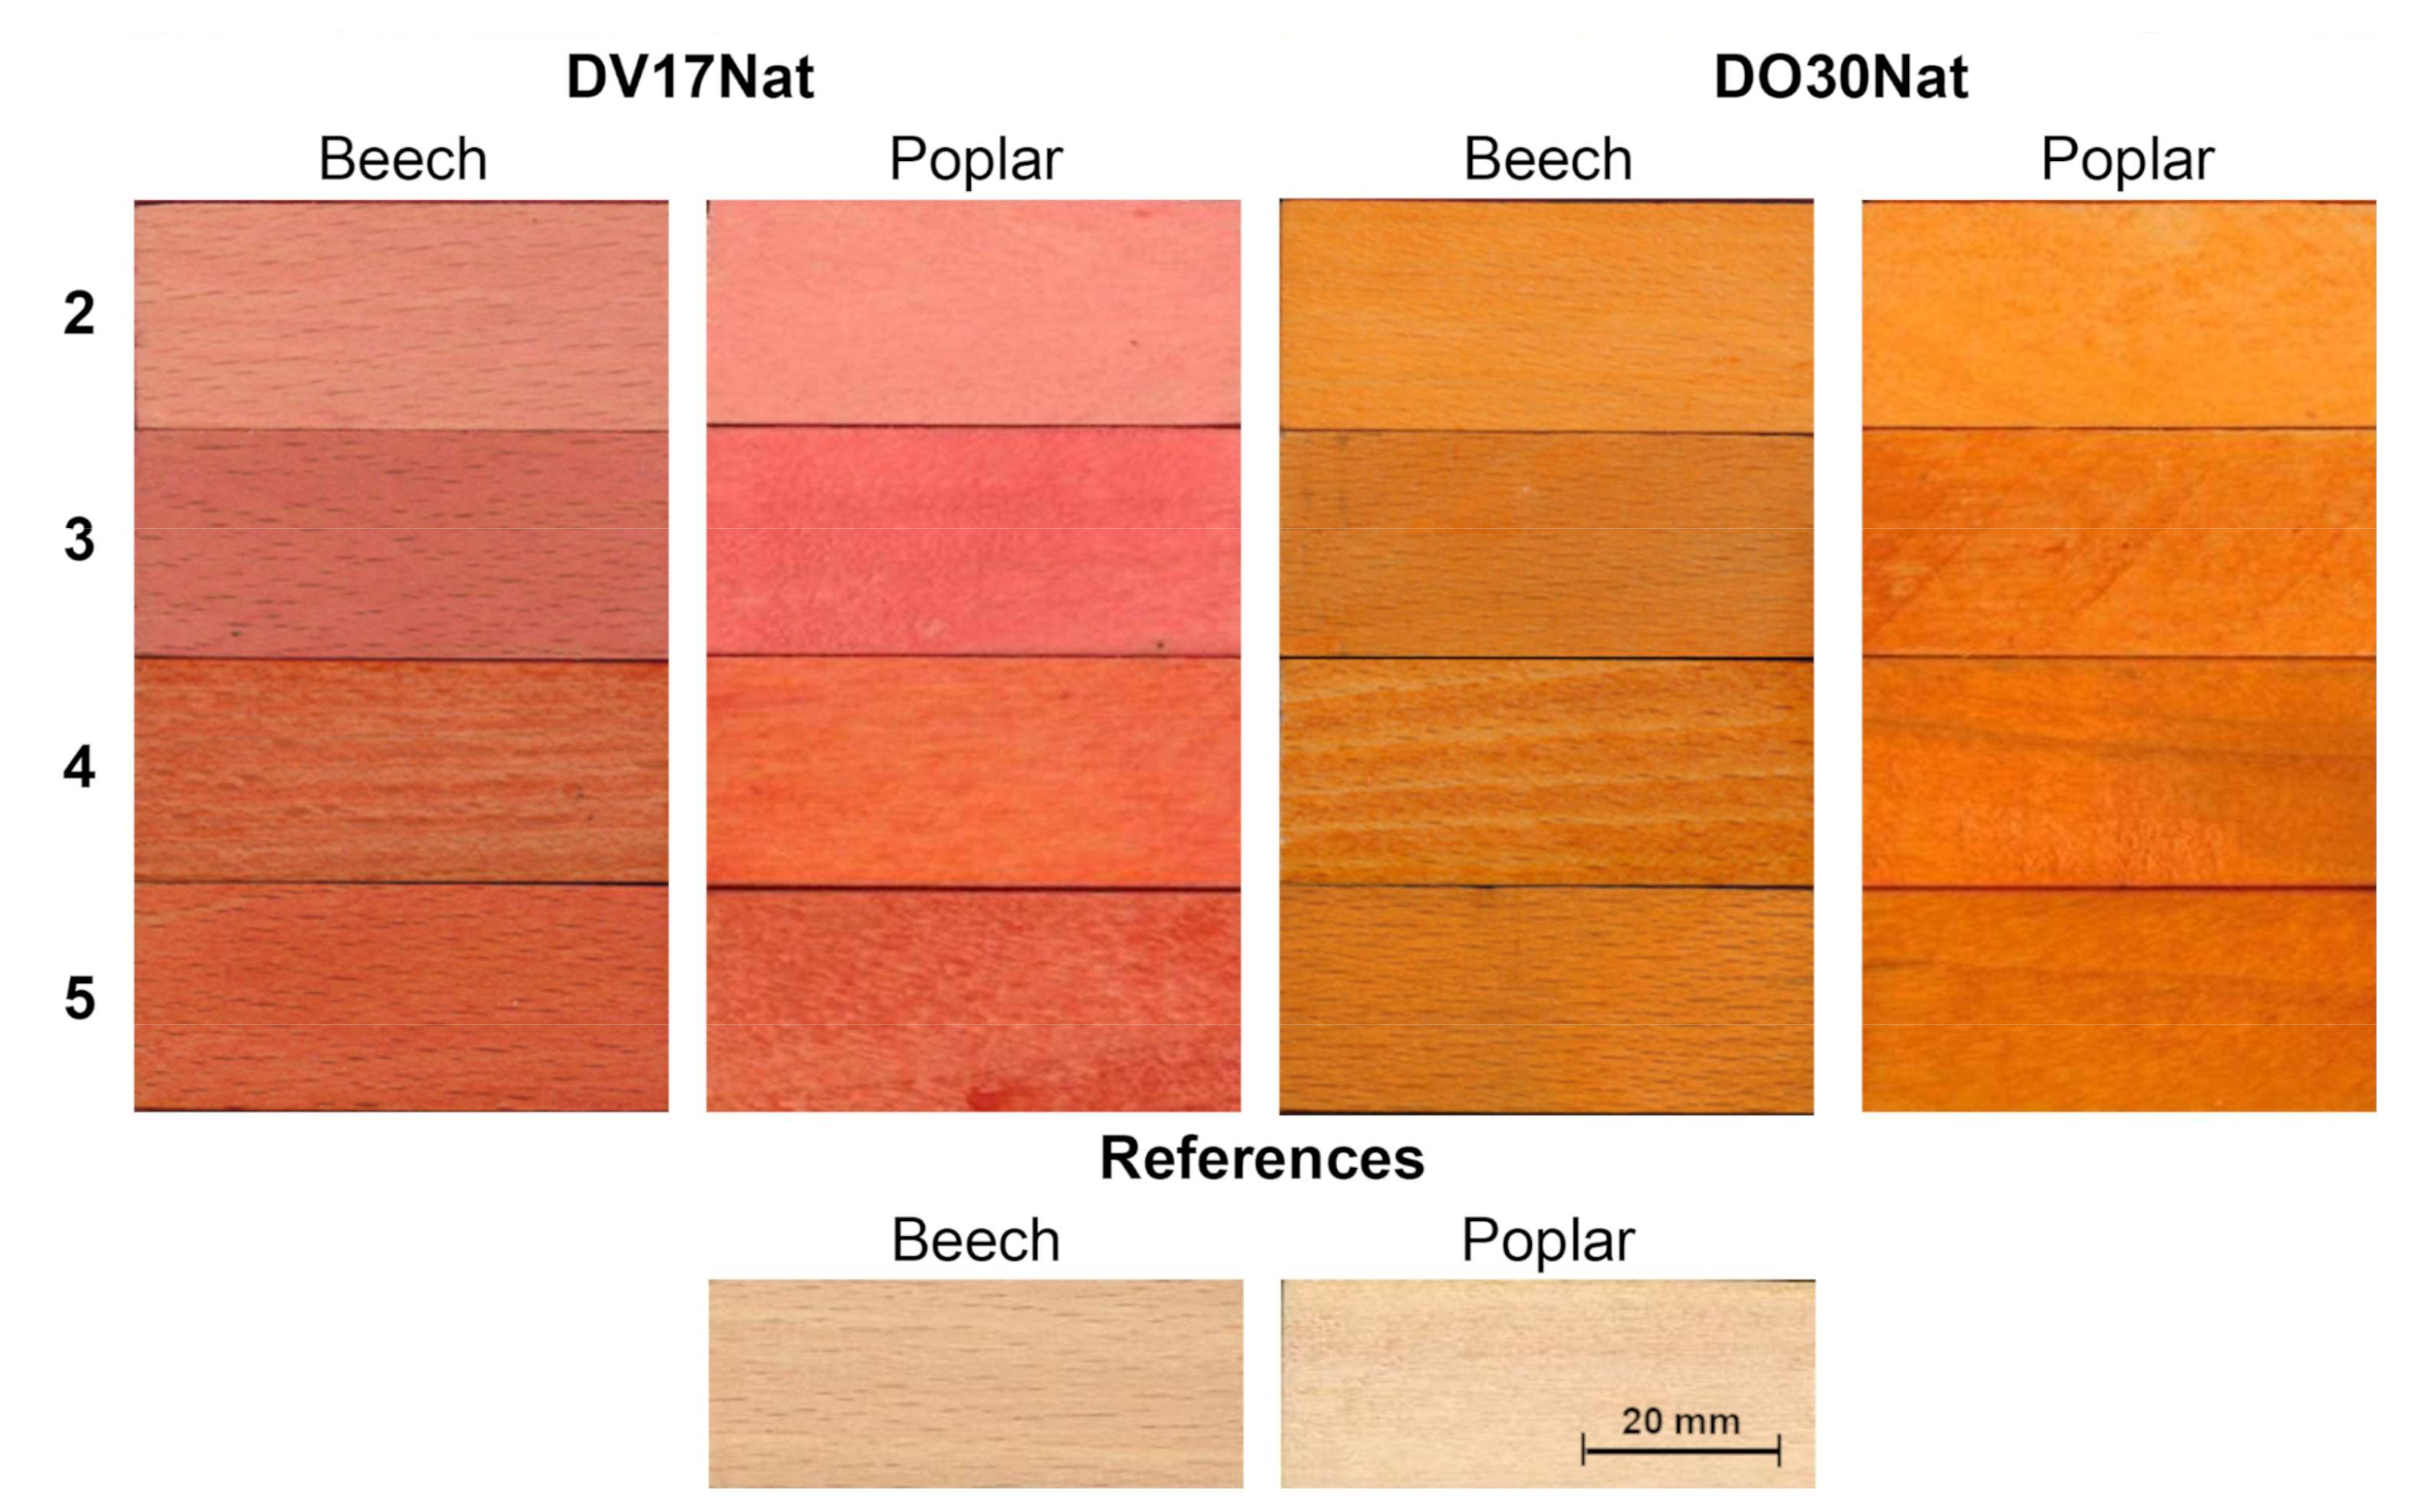 Wood dyes - dye is applied for blending in different species of wood